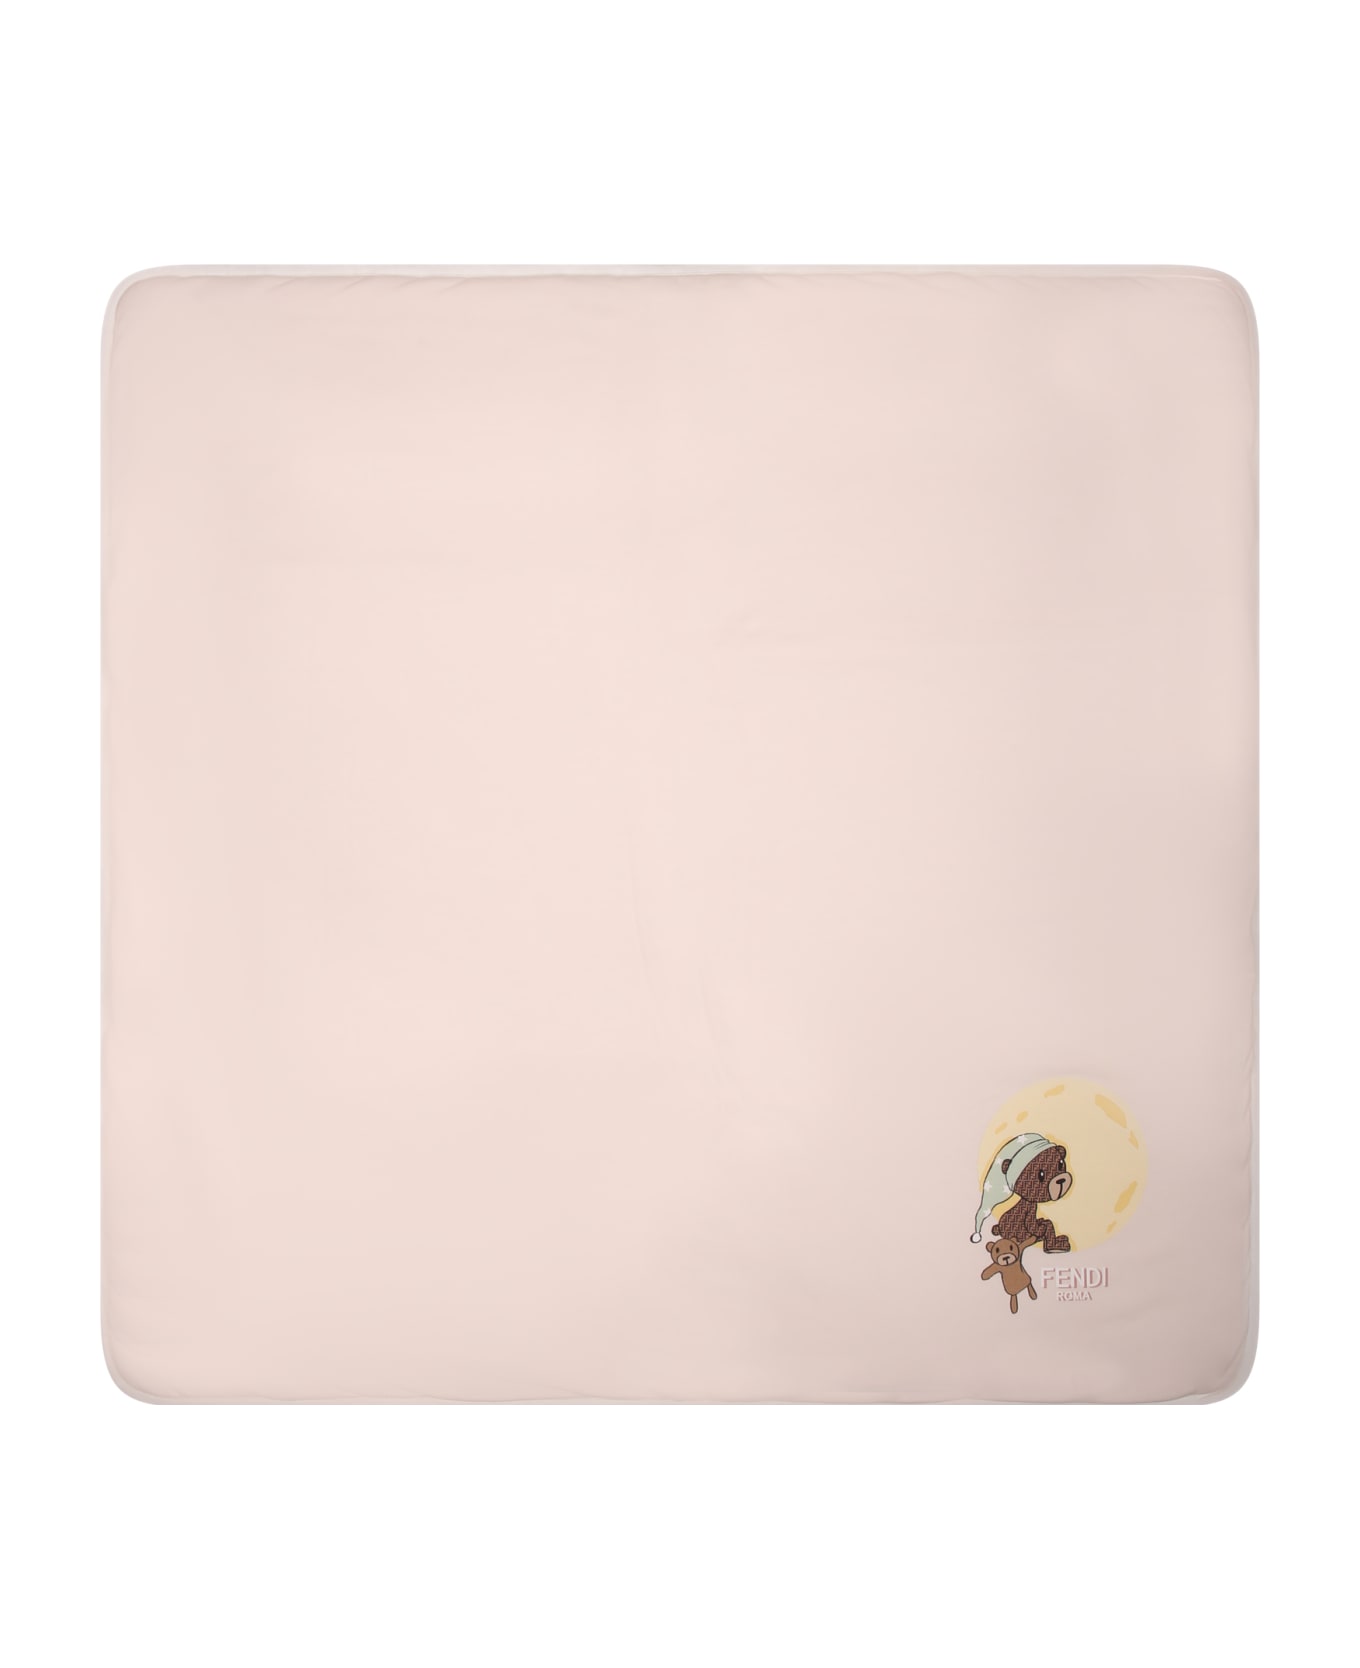 Fendi BAGUETTE Pink Blanket For Baby Girl With Teddy Bear - Pink